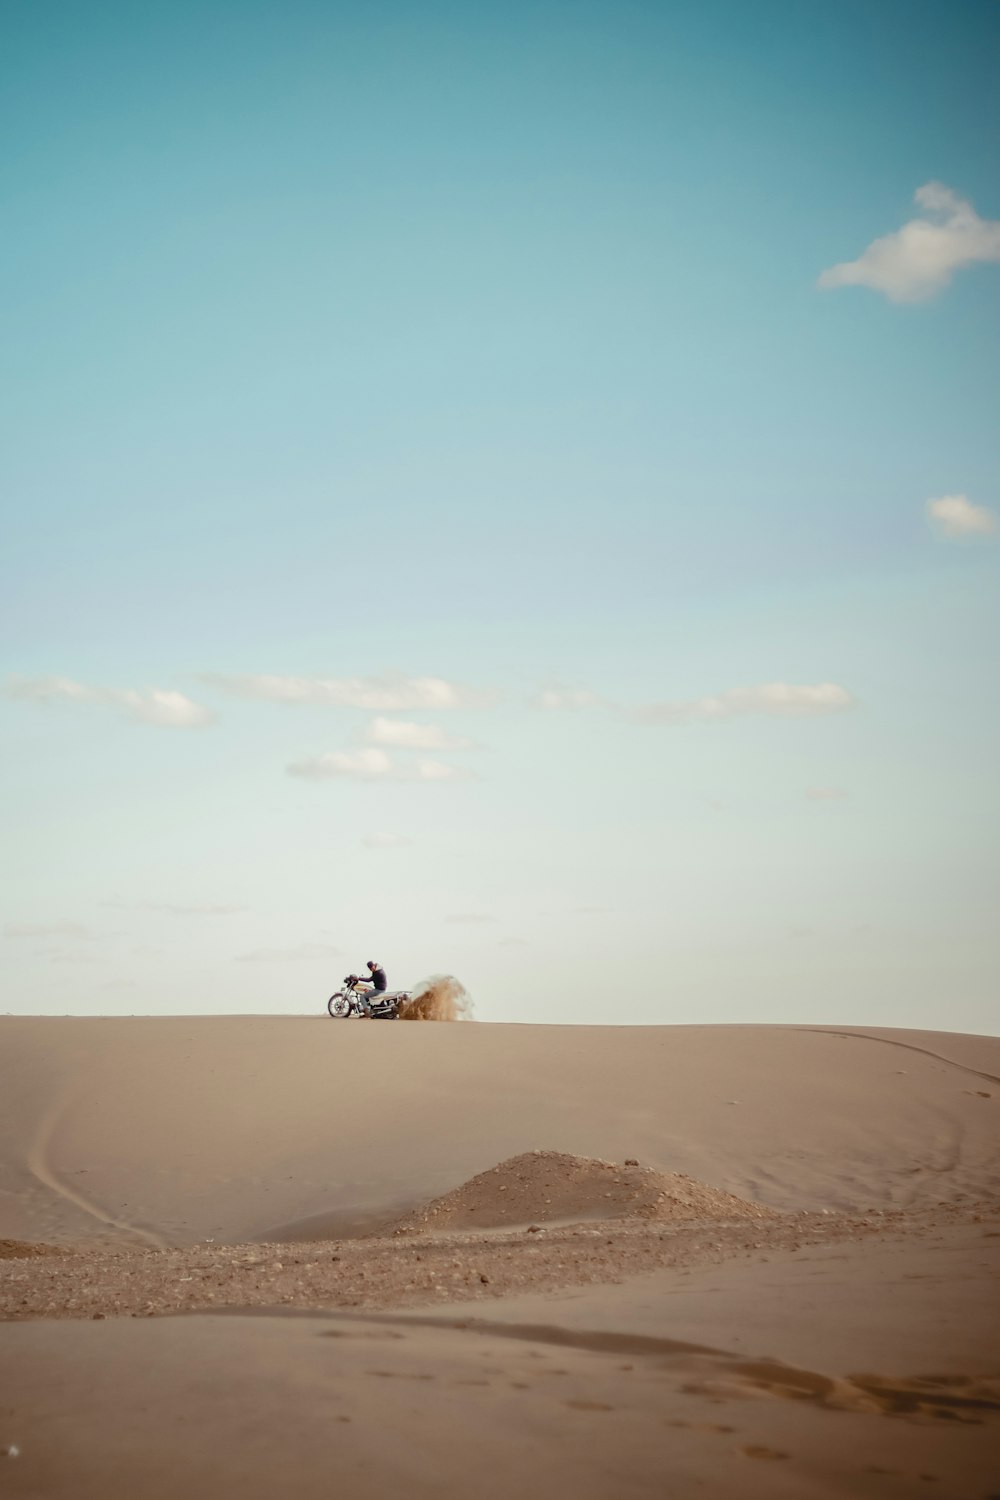 a person riding a motorcycle on top of a sandy hill